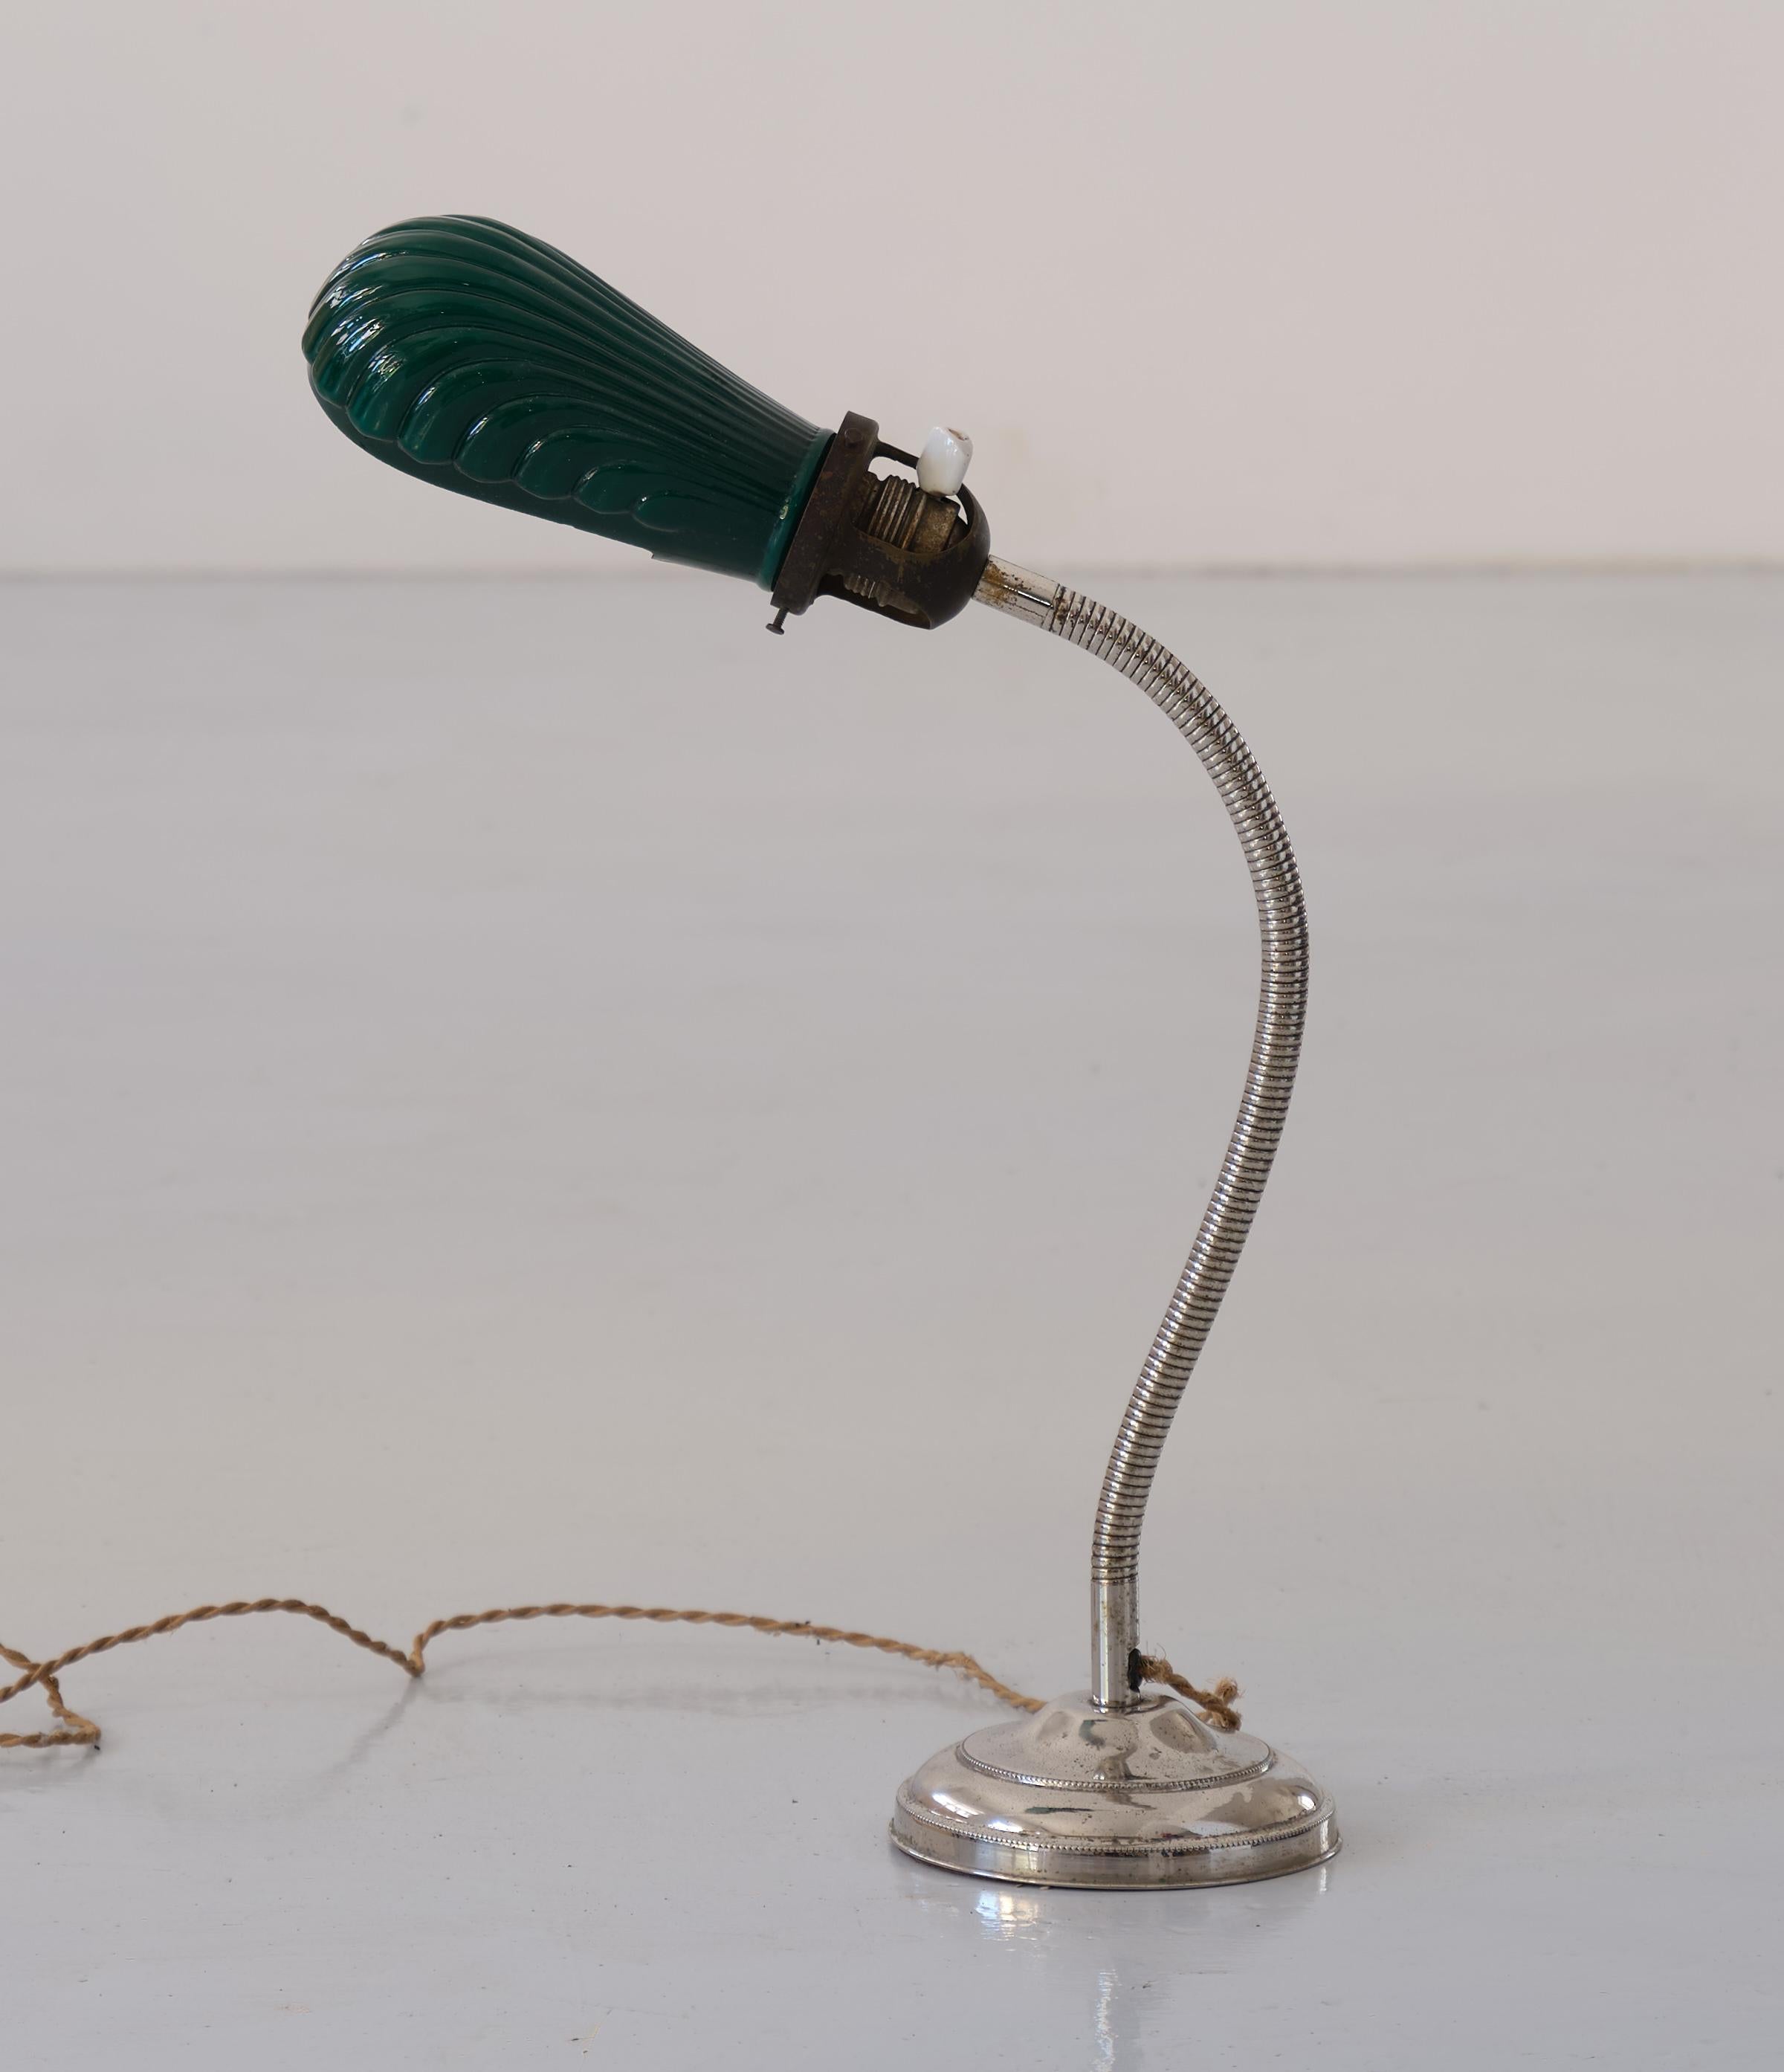 Vintage table lamp, made of chromed metal and green glass shade , Italy

Shell-shaped lampshade and two-tone glass, green outside and white inside
This lamp is in good vintage condition.

Ceramic rotary switch. 
Original working wire with